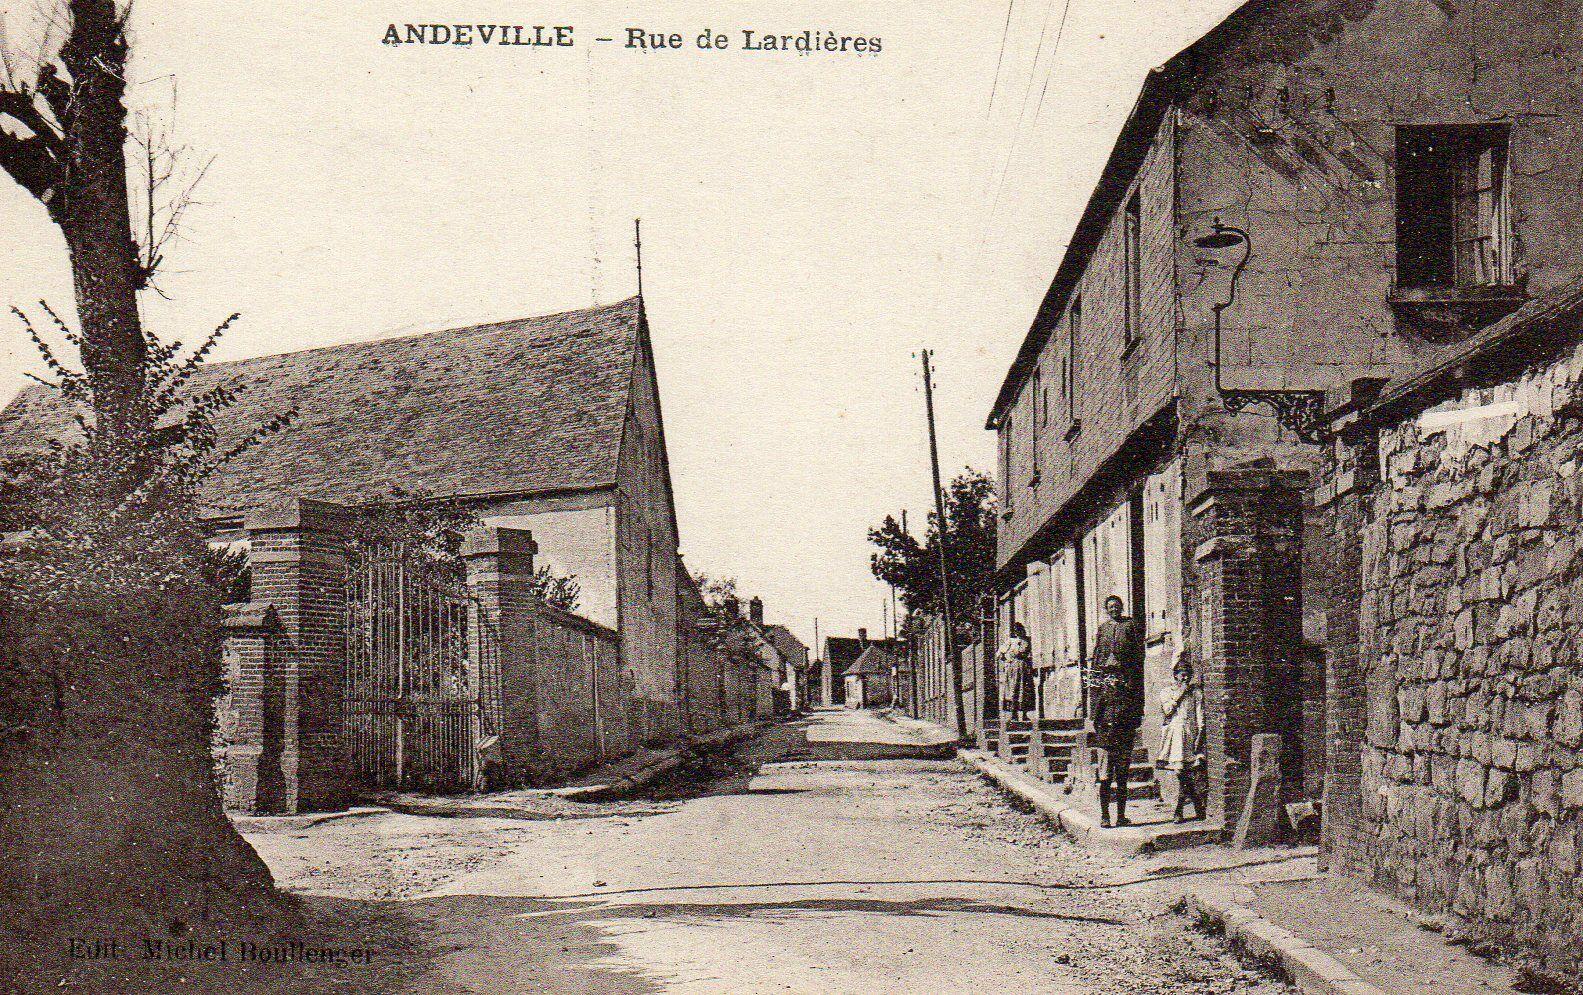 3andeville